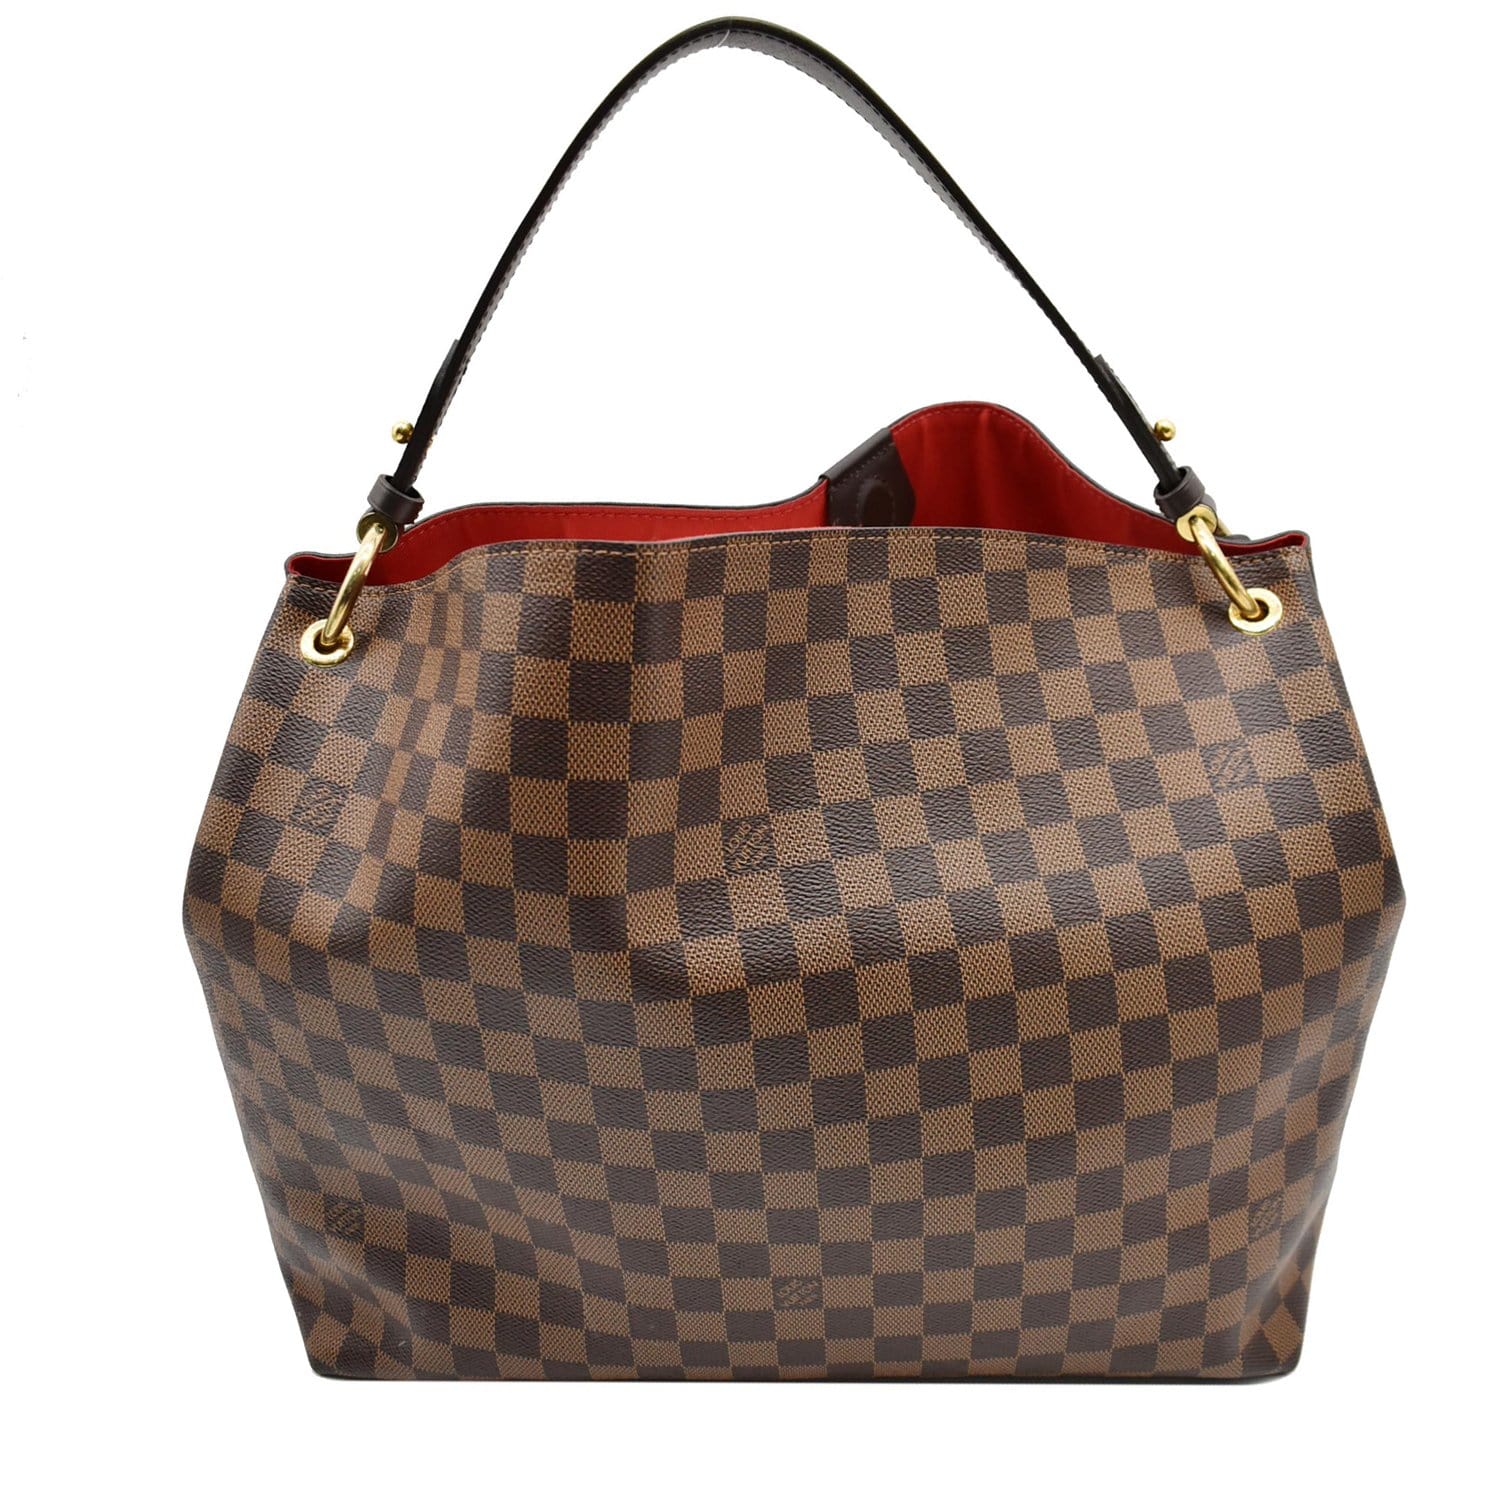 LOUIS VUITTON GRACEFUL MM!! EVERYTHING YOU NEED TO